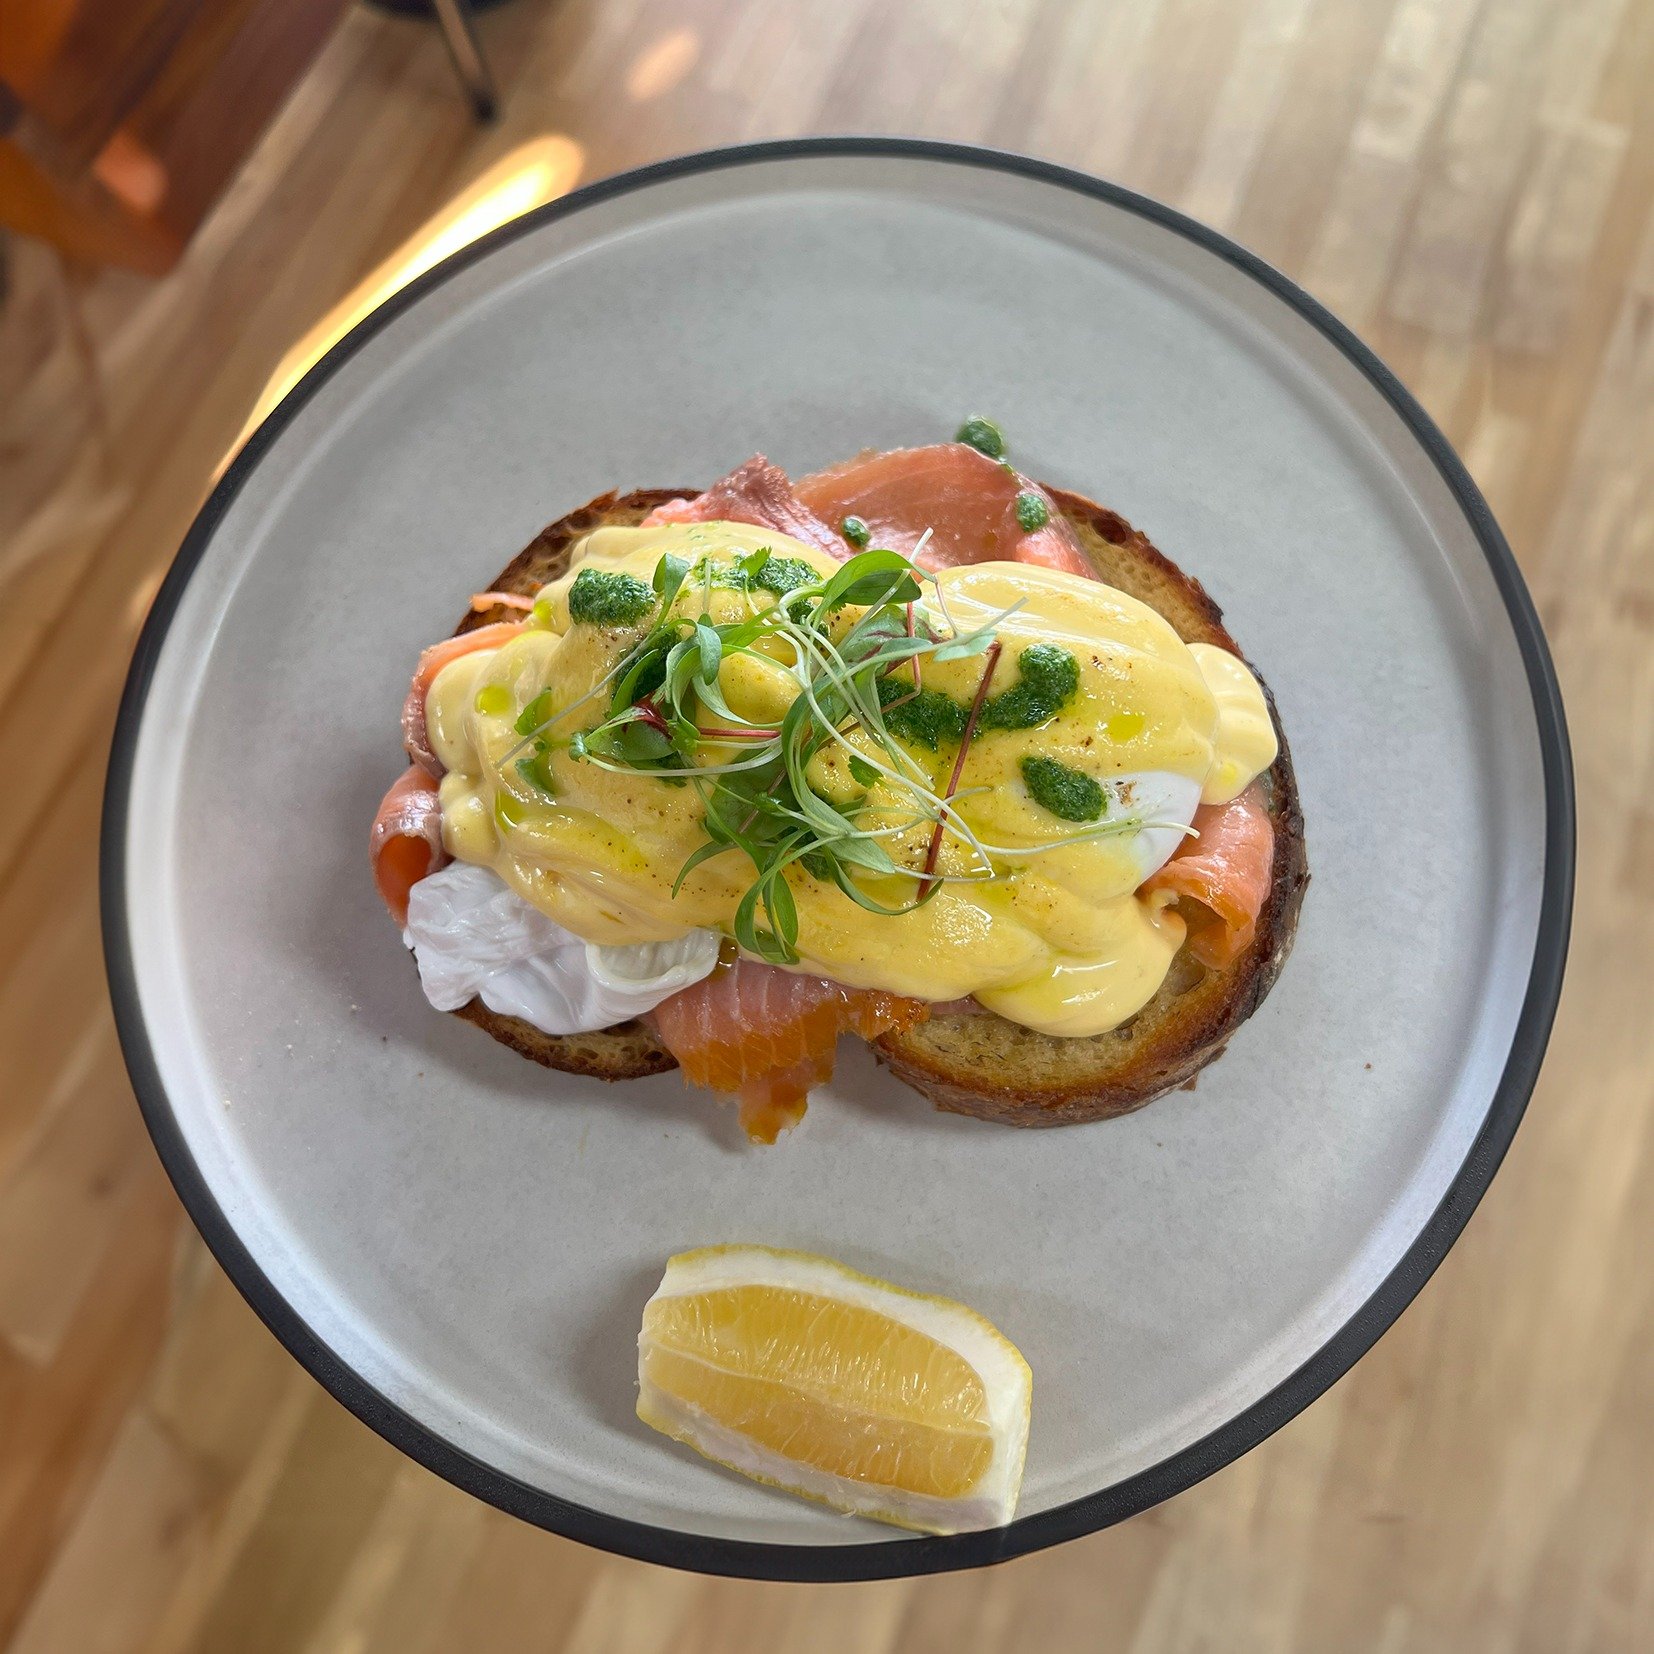 Eggs Benedict with Salmon served on @twobobsbakery sourdough toast is always a favourite!

#nicecafe_nelsonbay #nicecafeatnelsonbay #portstephens #breakfastportstephens #breakfastnelsonbay #cafenelsonbay #twobobsbakery